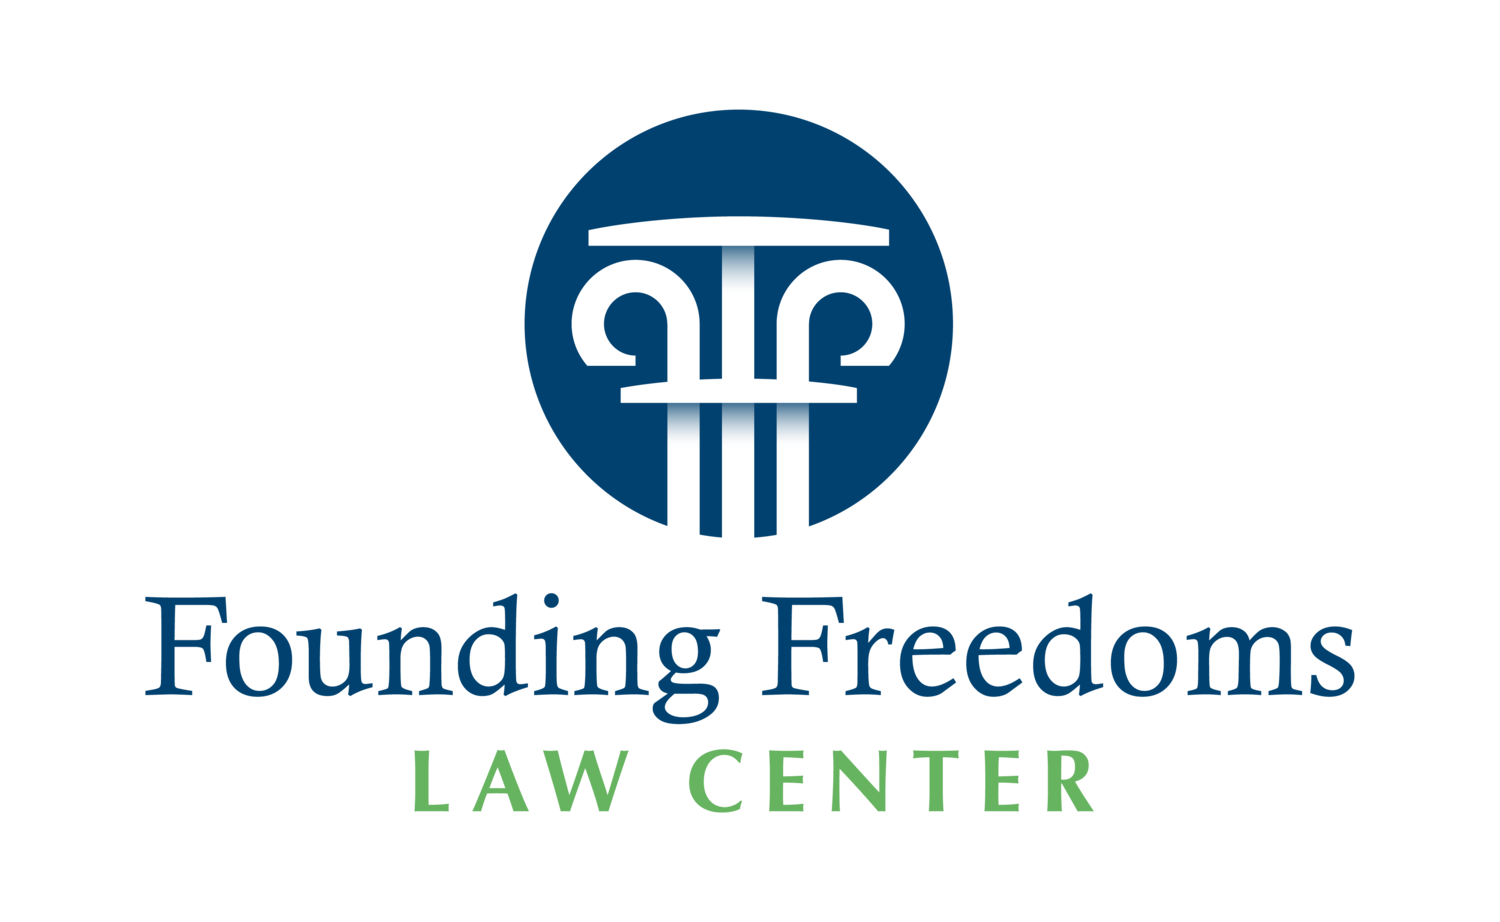 Founding Freedoms Law Center